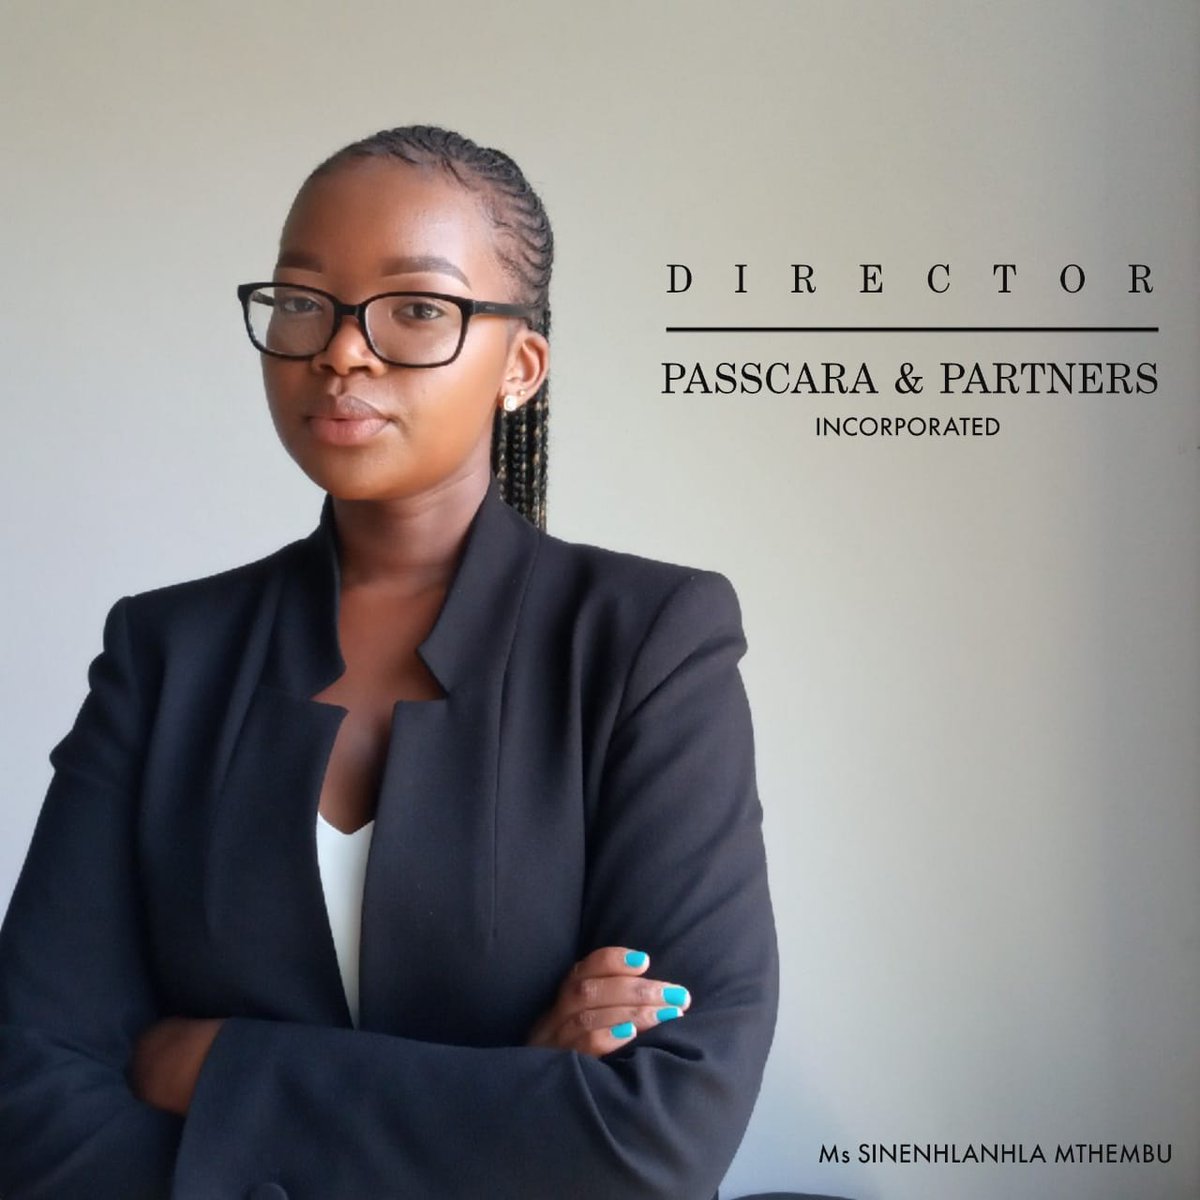 Allow me to Introduce myself. My name is Sinenhlanhla Passcara Mthembu and I am the Founder and Director of Passcara and Partners Incorporated. I am a 25 year old and the owner of this Law Firm.
I am to Inspire. If I did it then so can you!!! #GirlsTalkZA